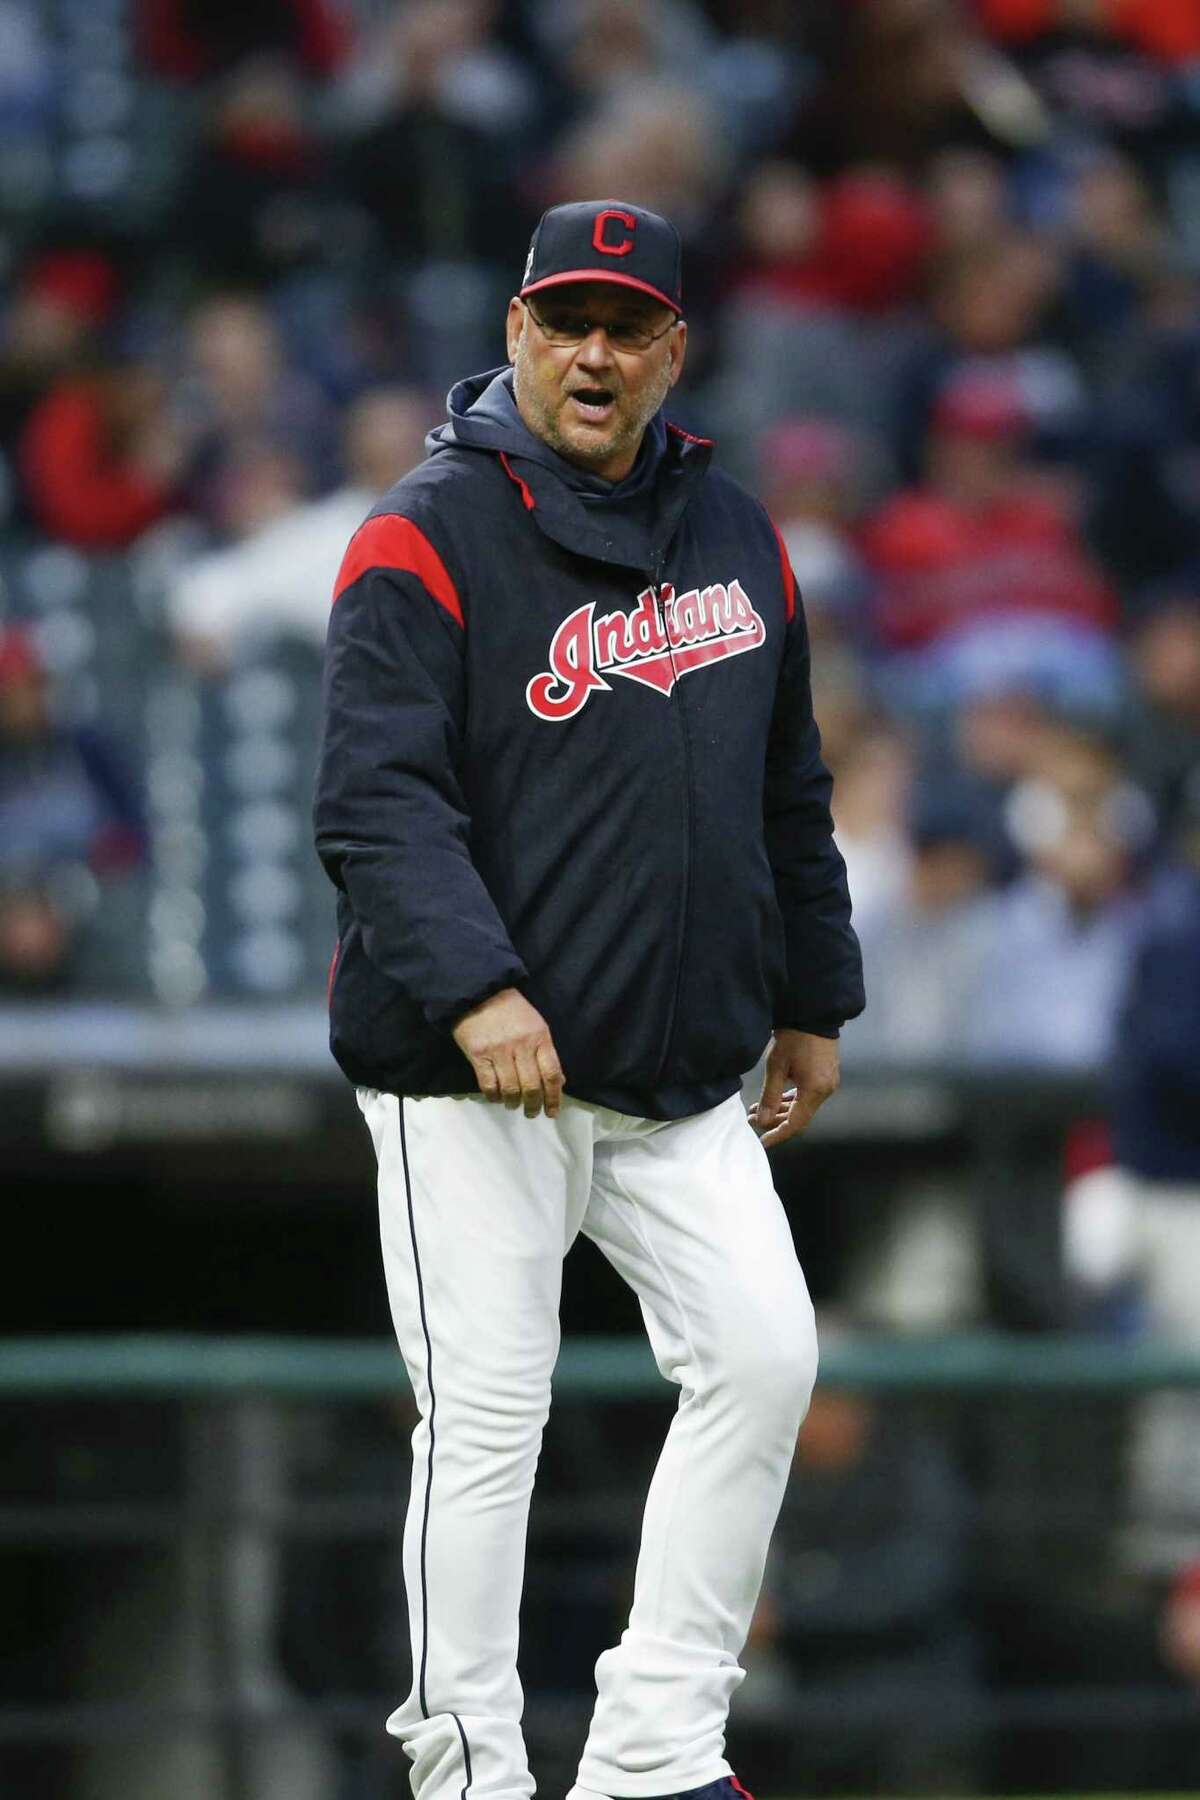 Cleveland Indians to drop 'Indians' from its name, though not